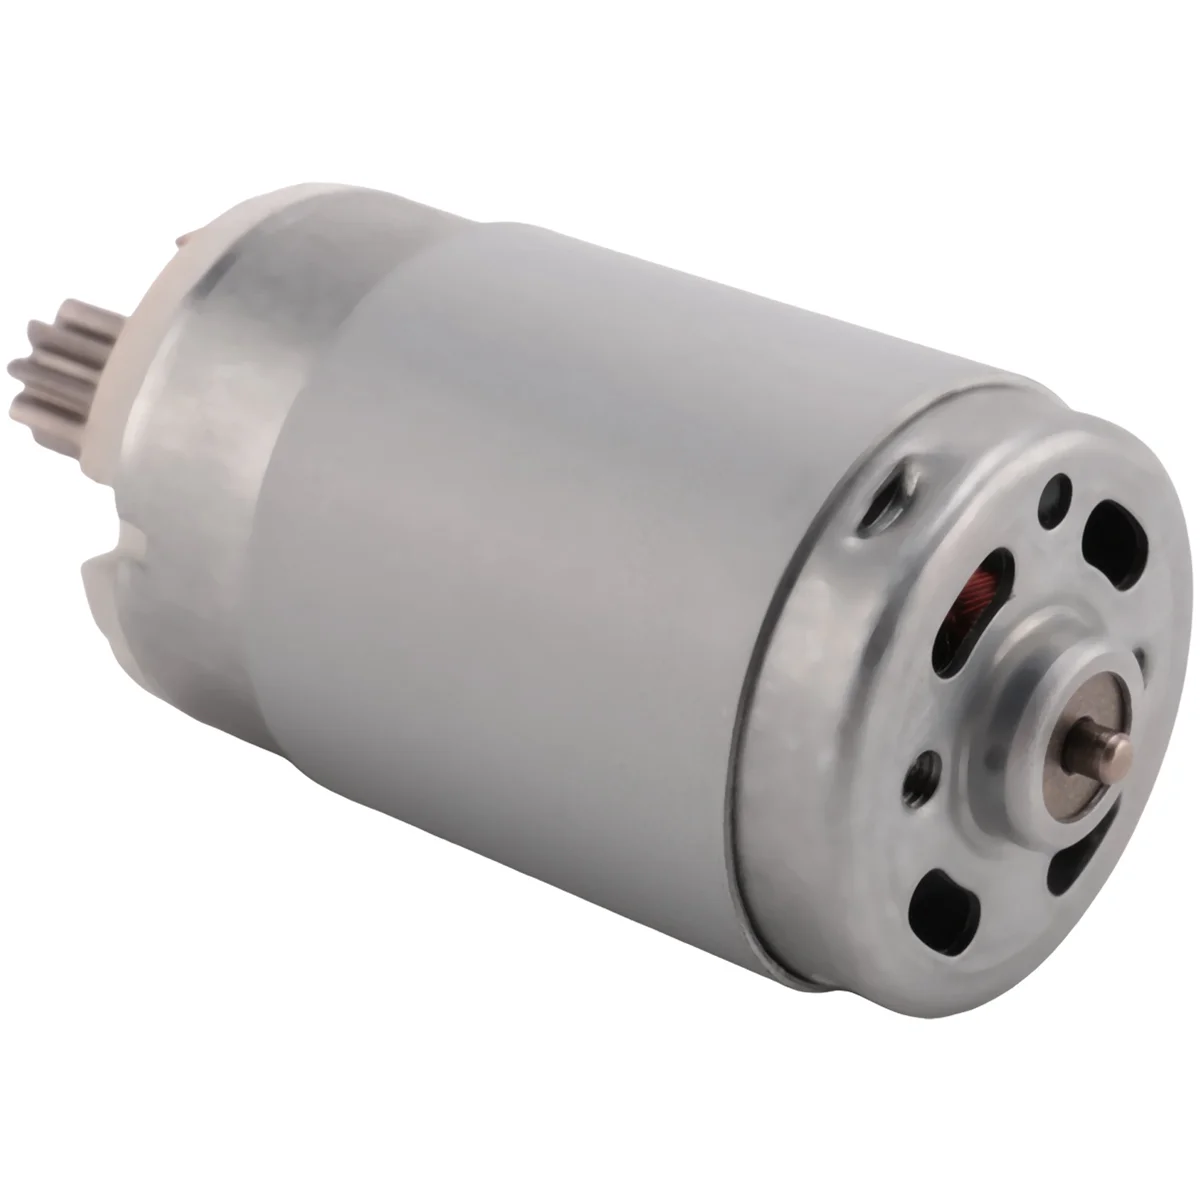 For Johnson New Electronic Throttle Control 12V DC Motor 9-Tooth for-Audi Mercedes Benz -BMW Ford 993647060/73541900